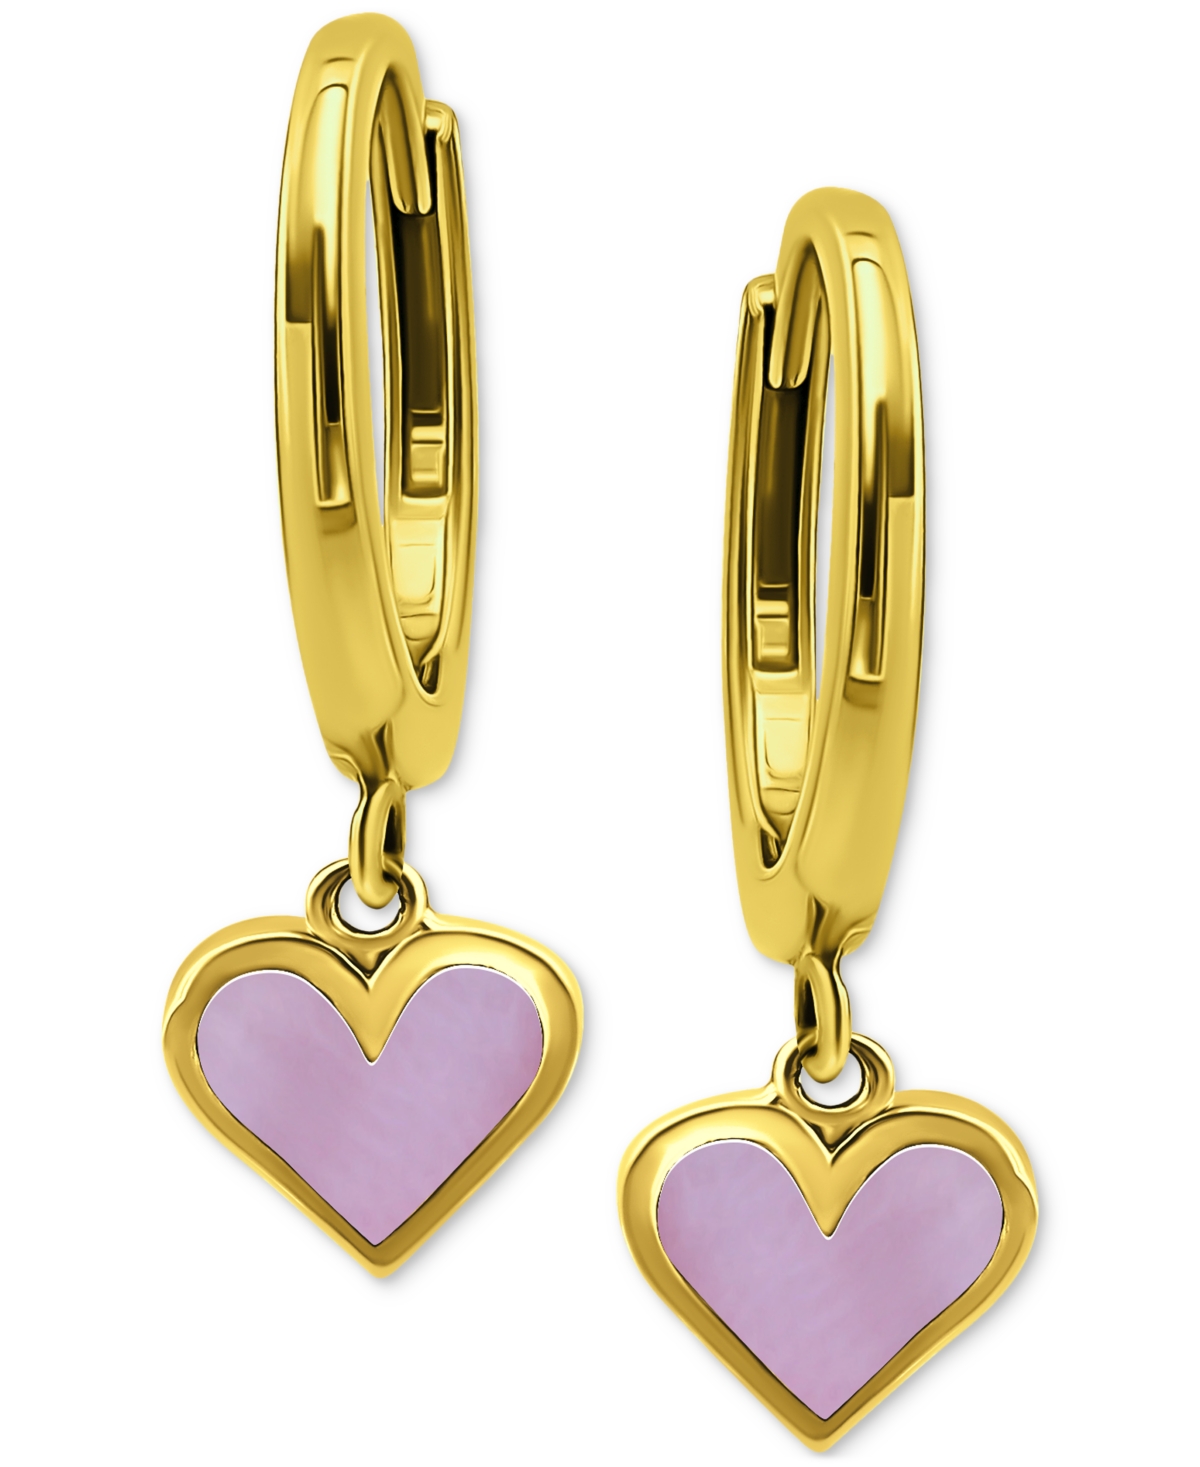 Pink Shell Heart Dangle Hoop Drop Earrings in 18k Gold-Plated Sterling Silver, Created for Macy's - Pink Shell